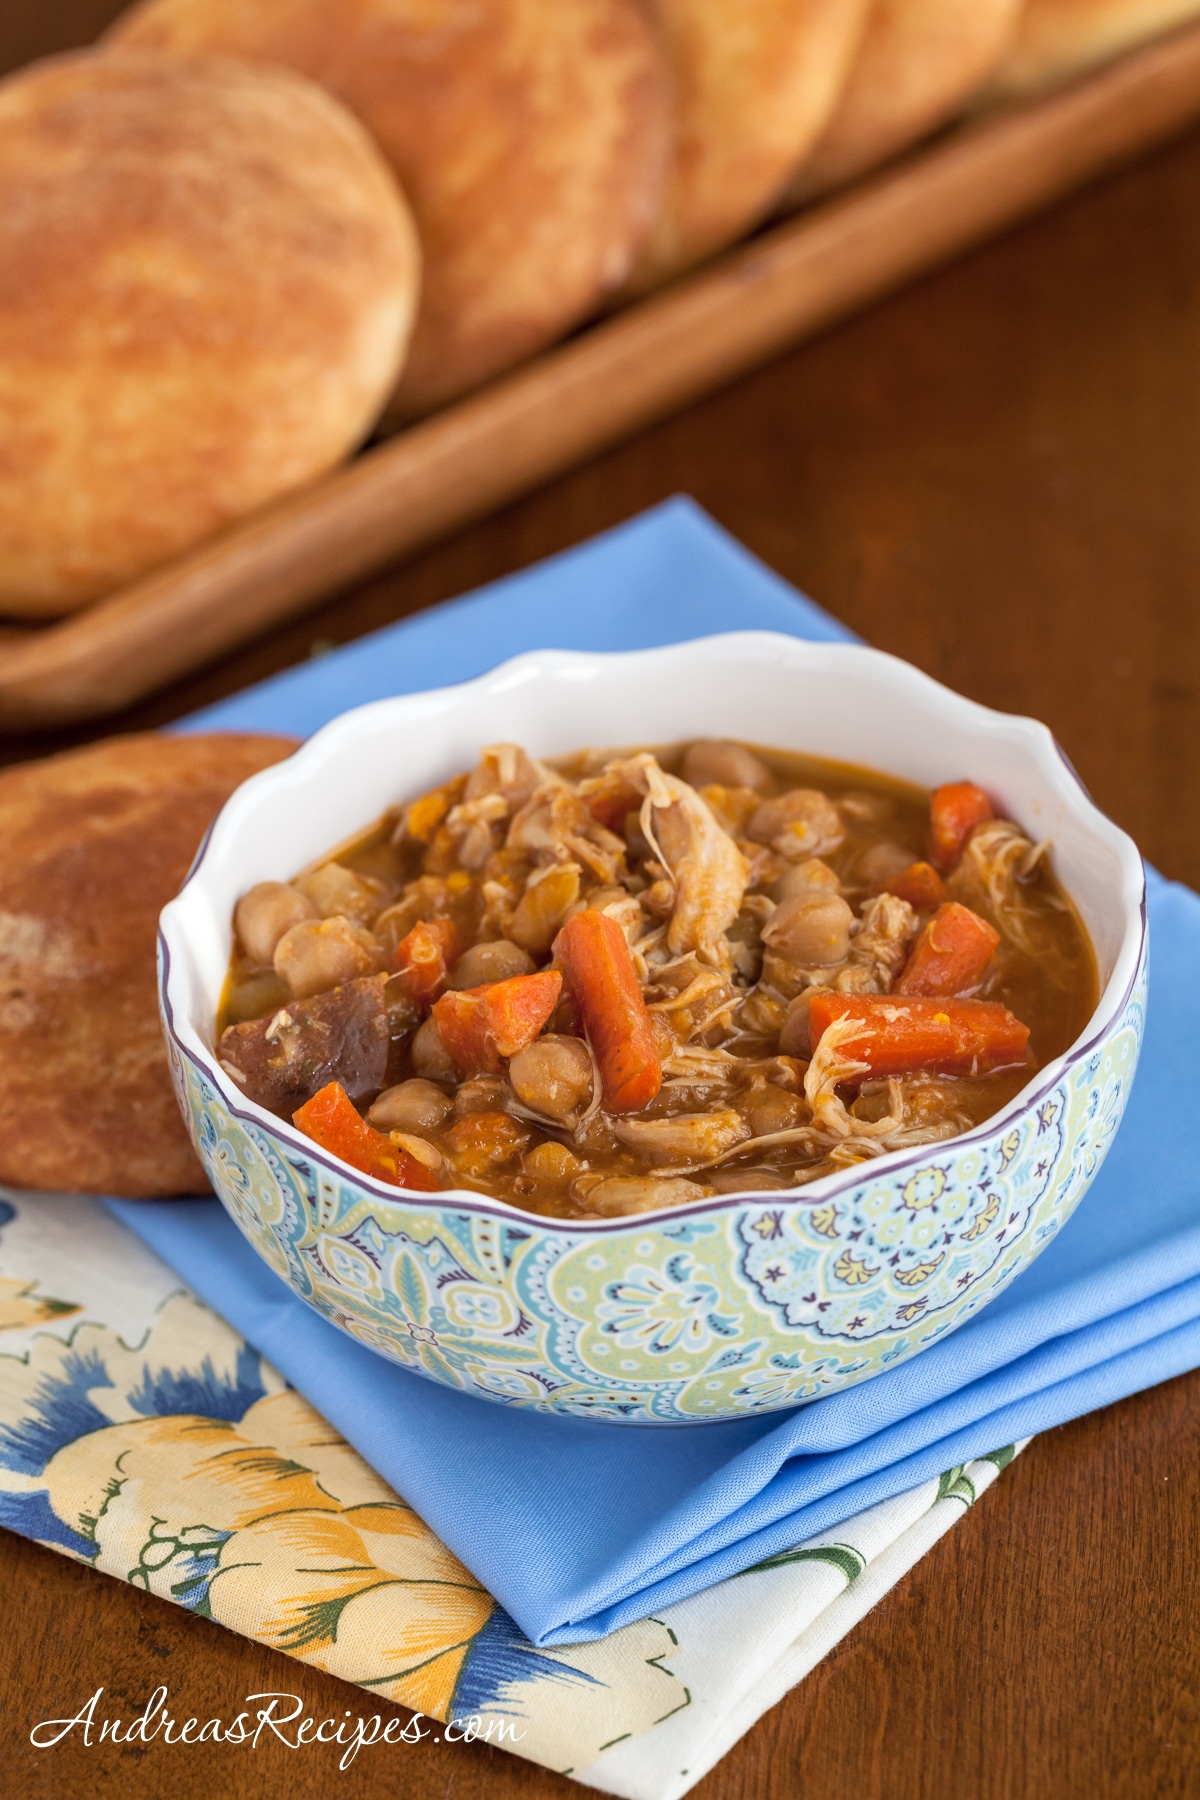 Slow Cooker Chicken Tagine with Chickpeas and Root Vegetables from Andrea Meyers